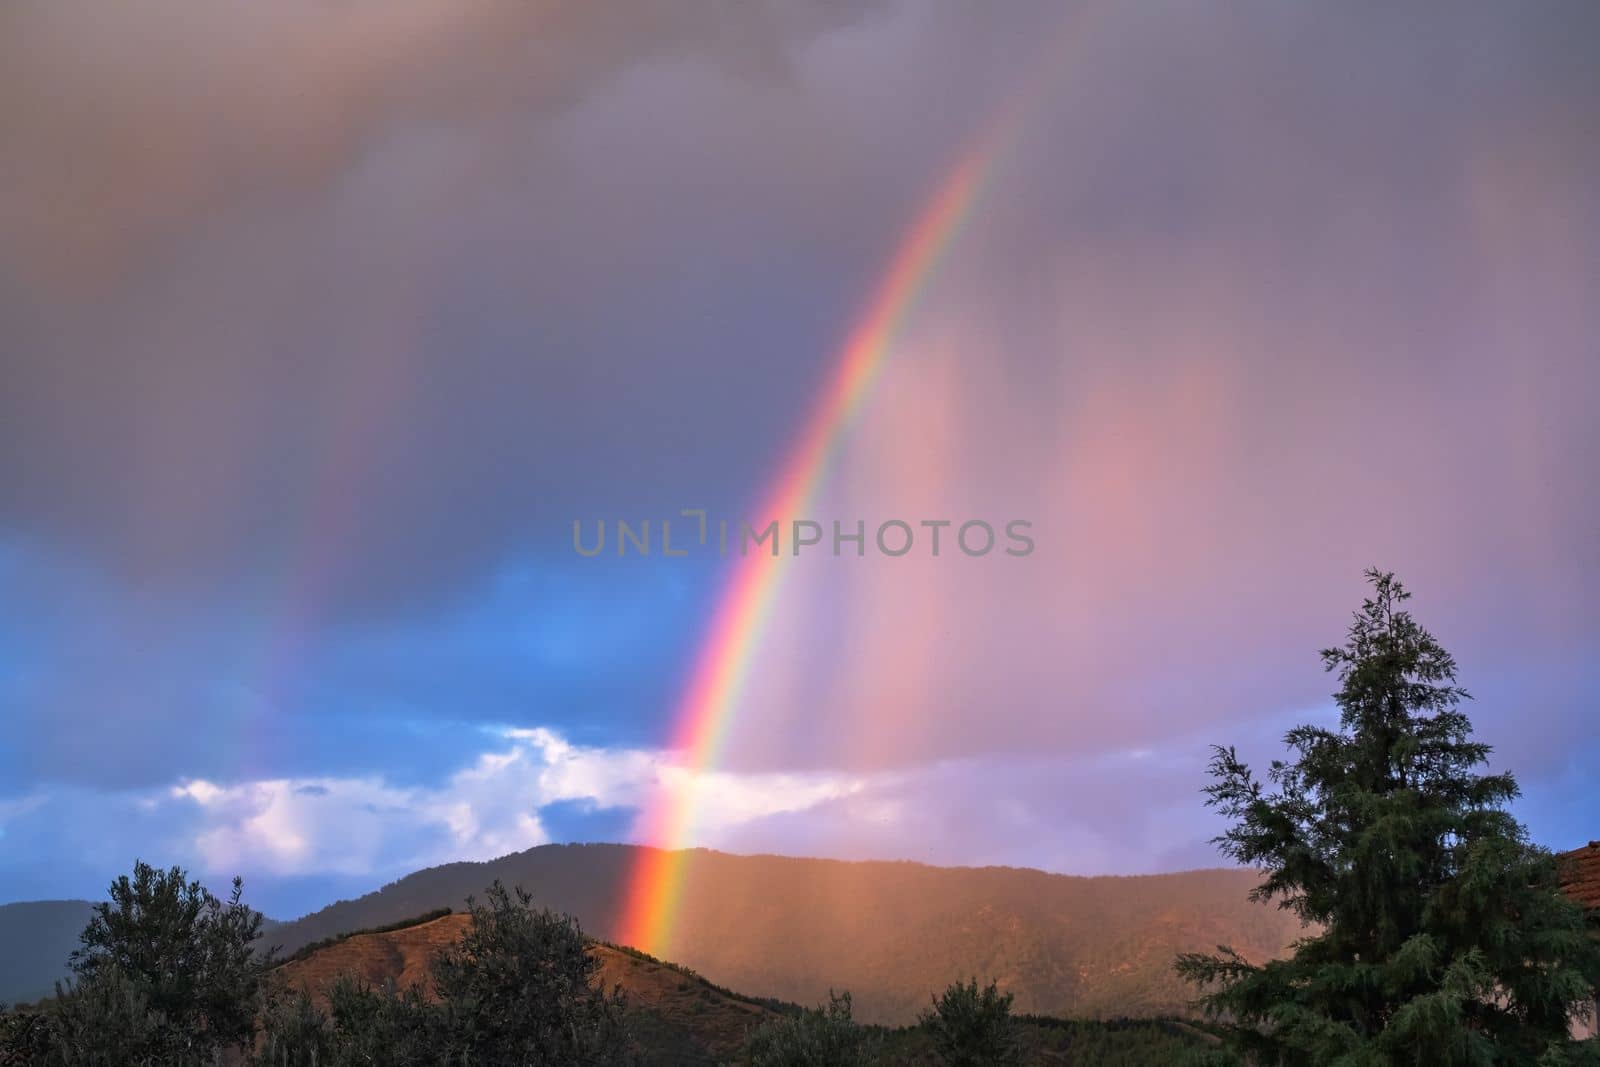 Rays of the sun breaking through the stormy sky, forming a marvelous rainbow. High quality photo